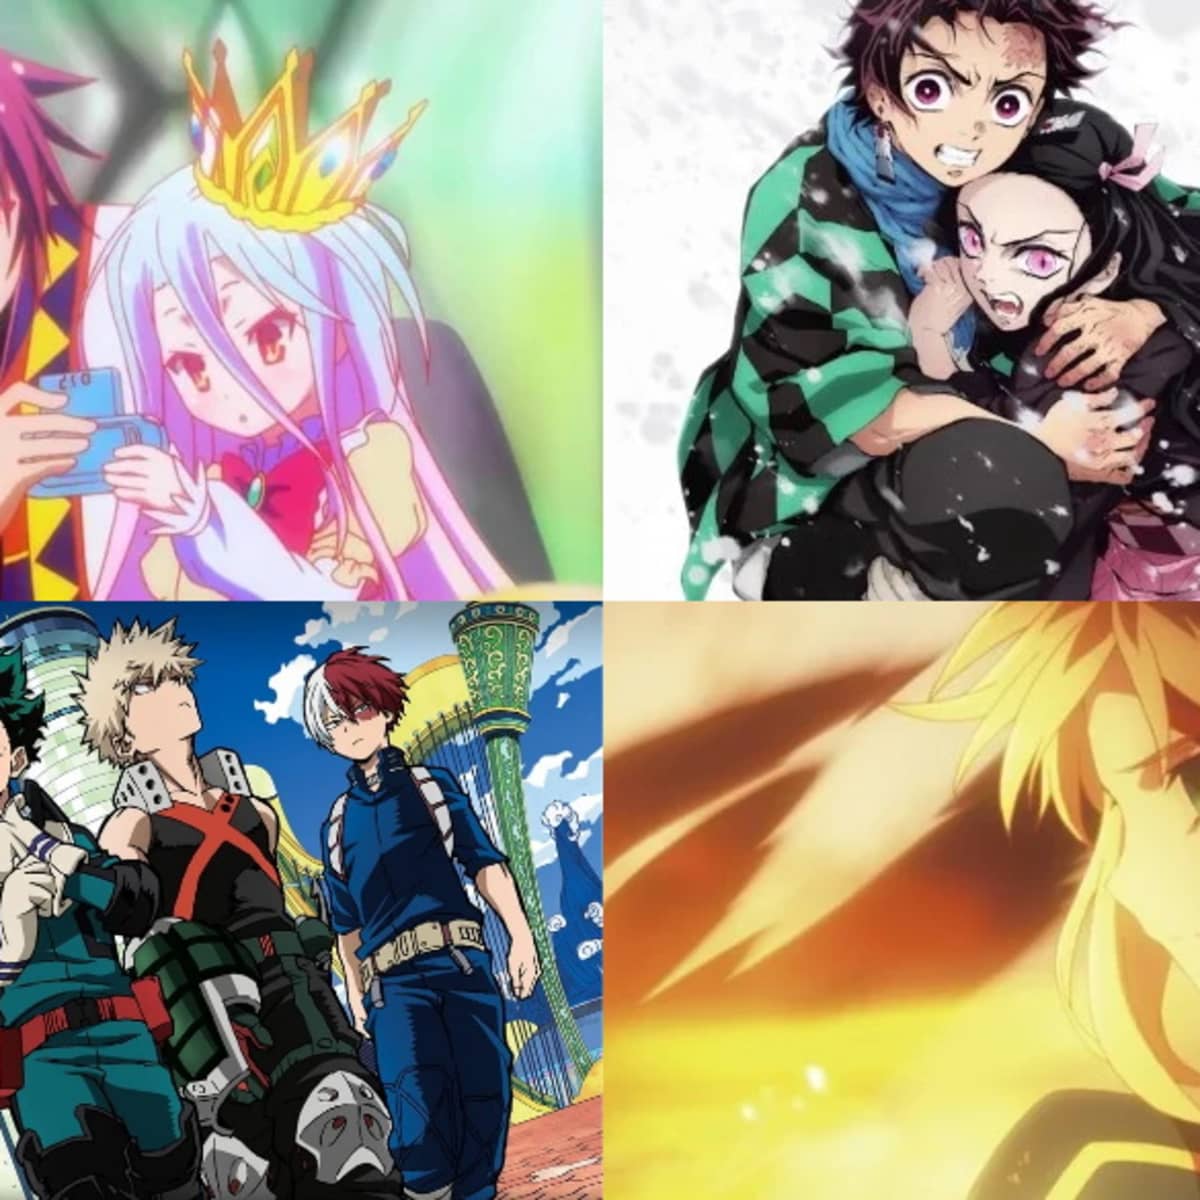 The Best Anime Streaming Services in 2020 - HubPages